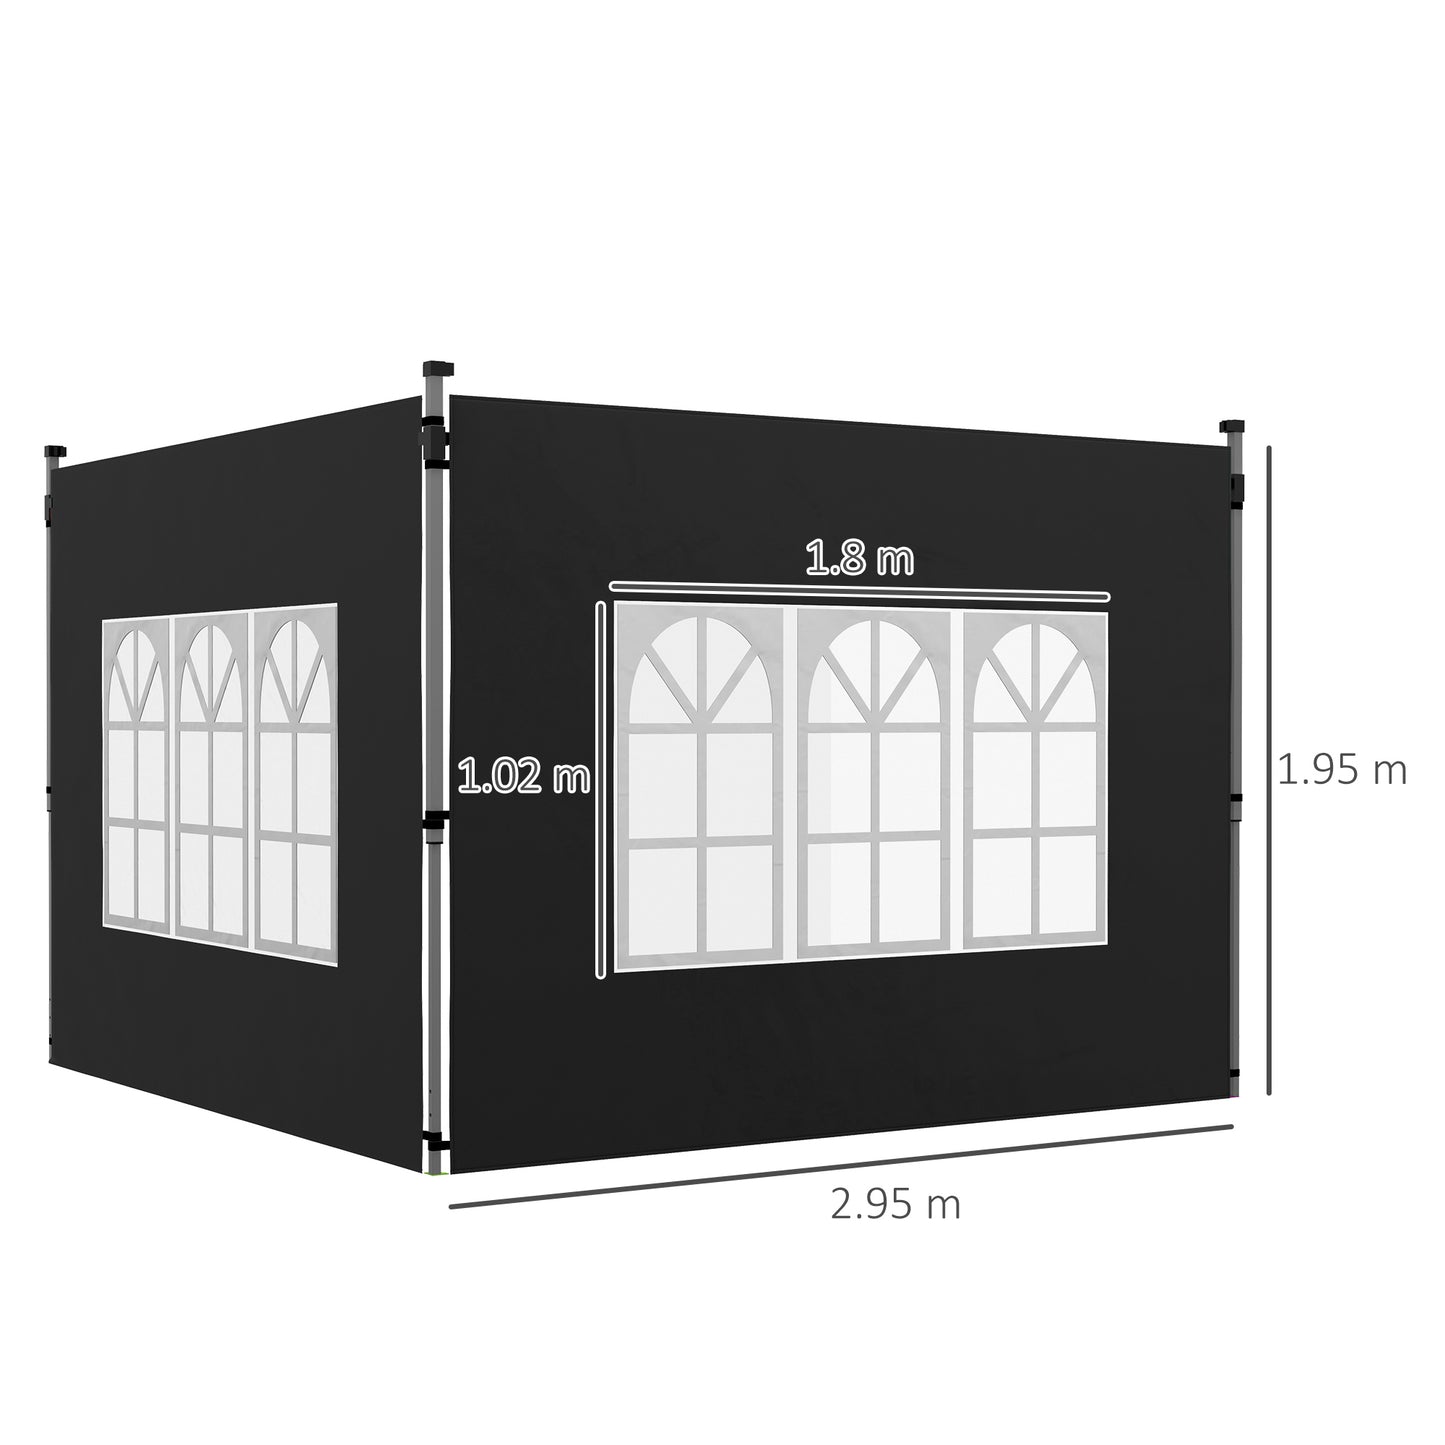 Outsunny Gazebo Side Panels, Sides Replacement with Window for 3x3(m) or 3x4m Pop Up Gazebo, 2 Pack, Black